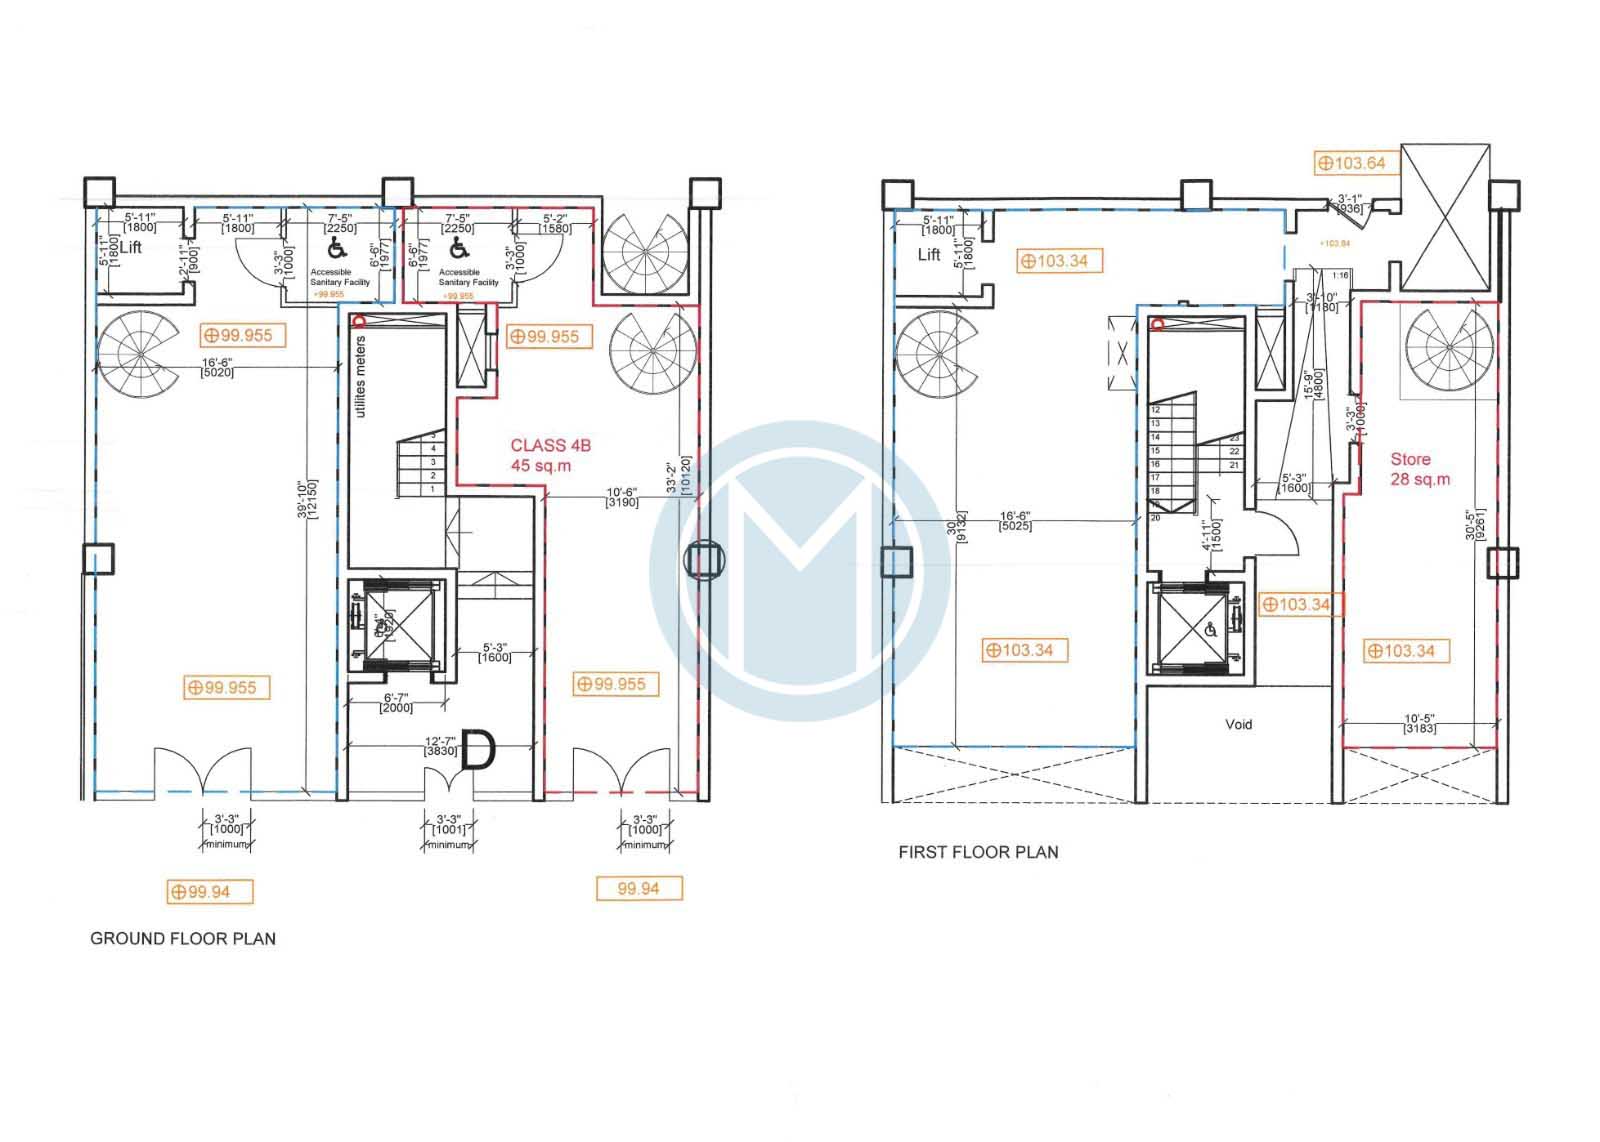 Sliema Retail Office For Rent - Plan